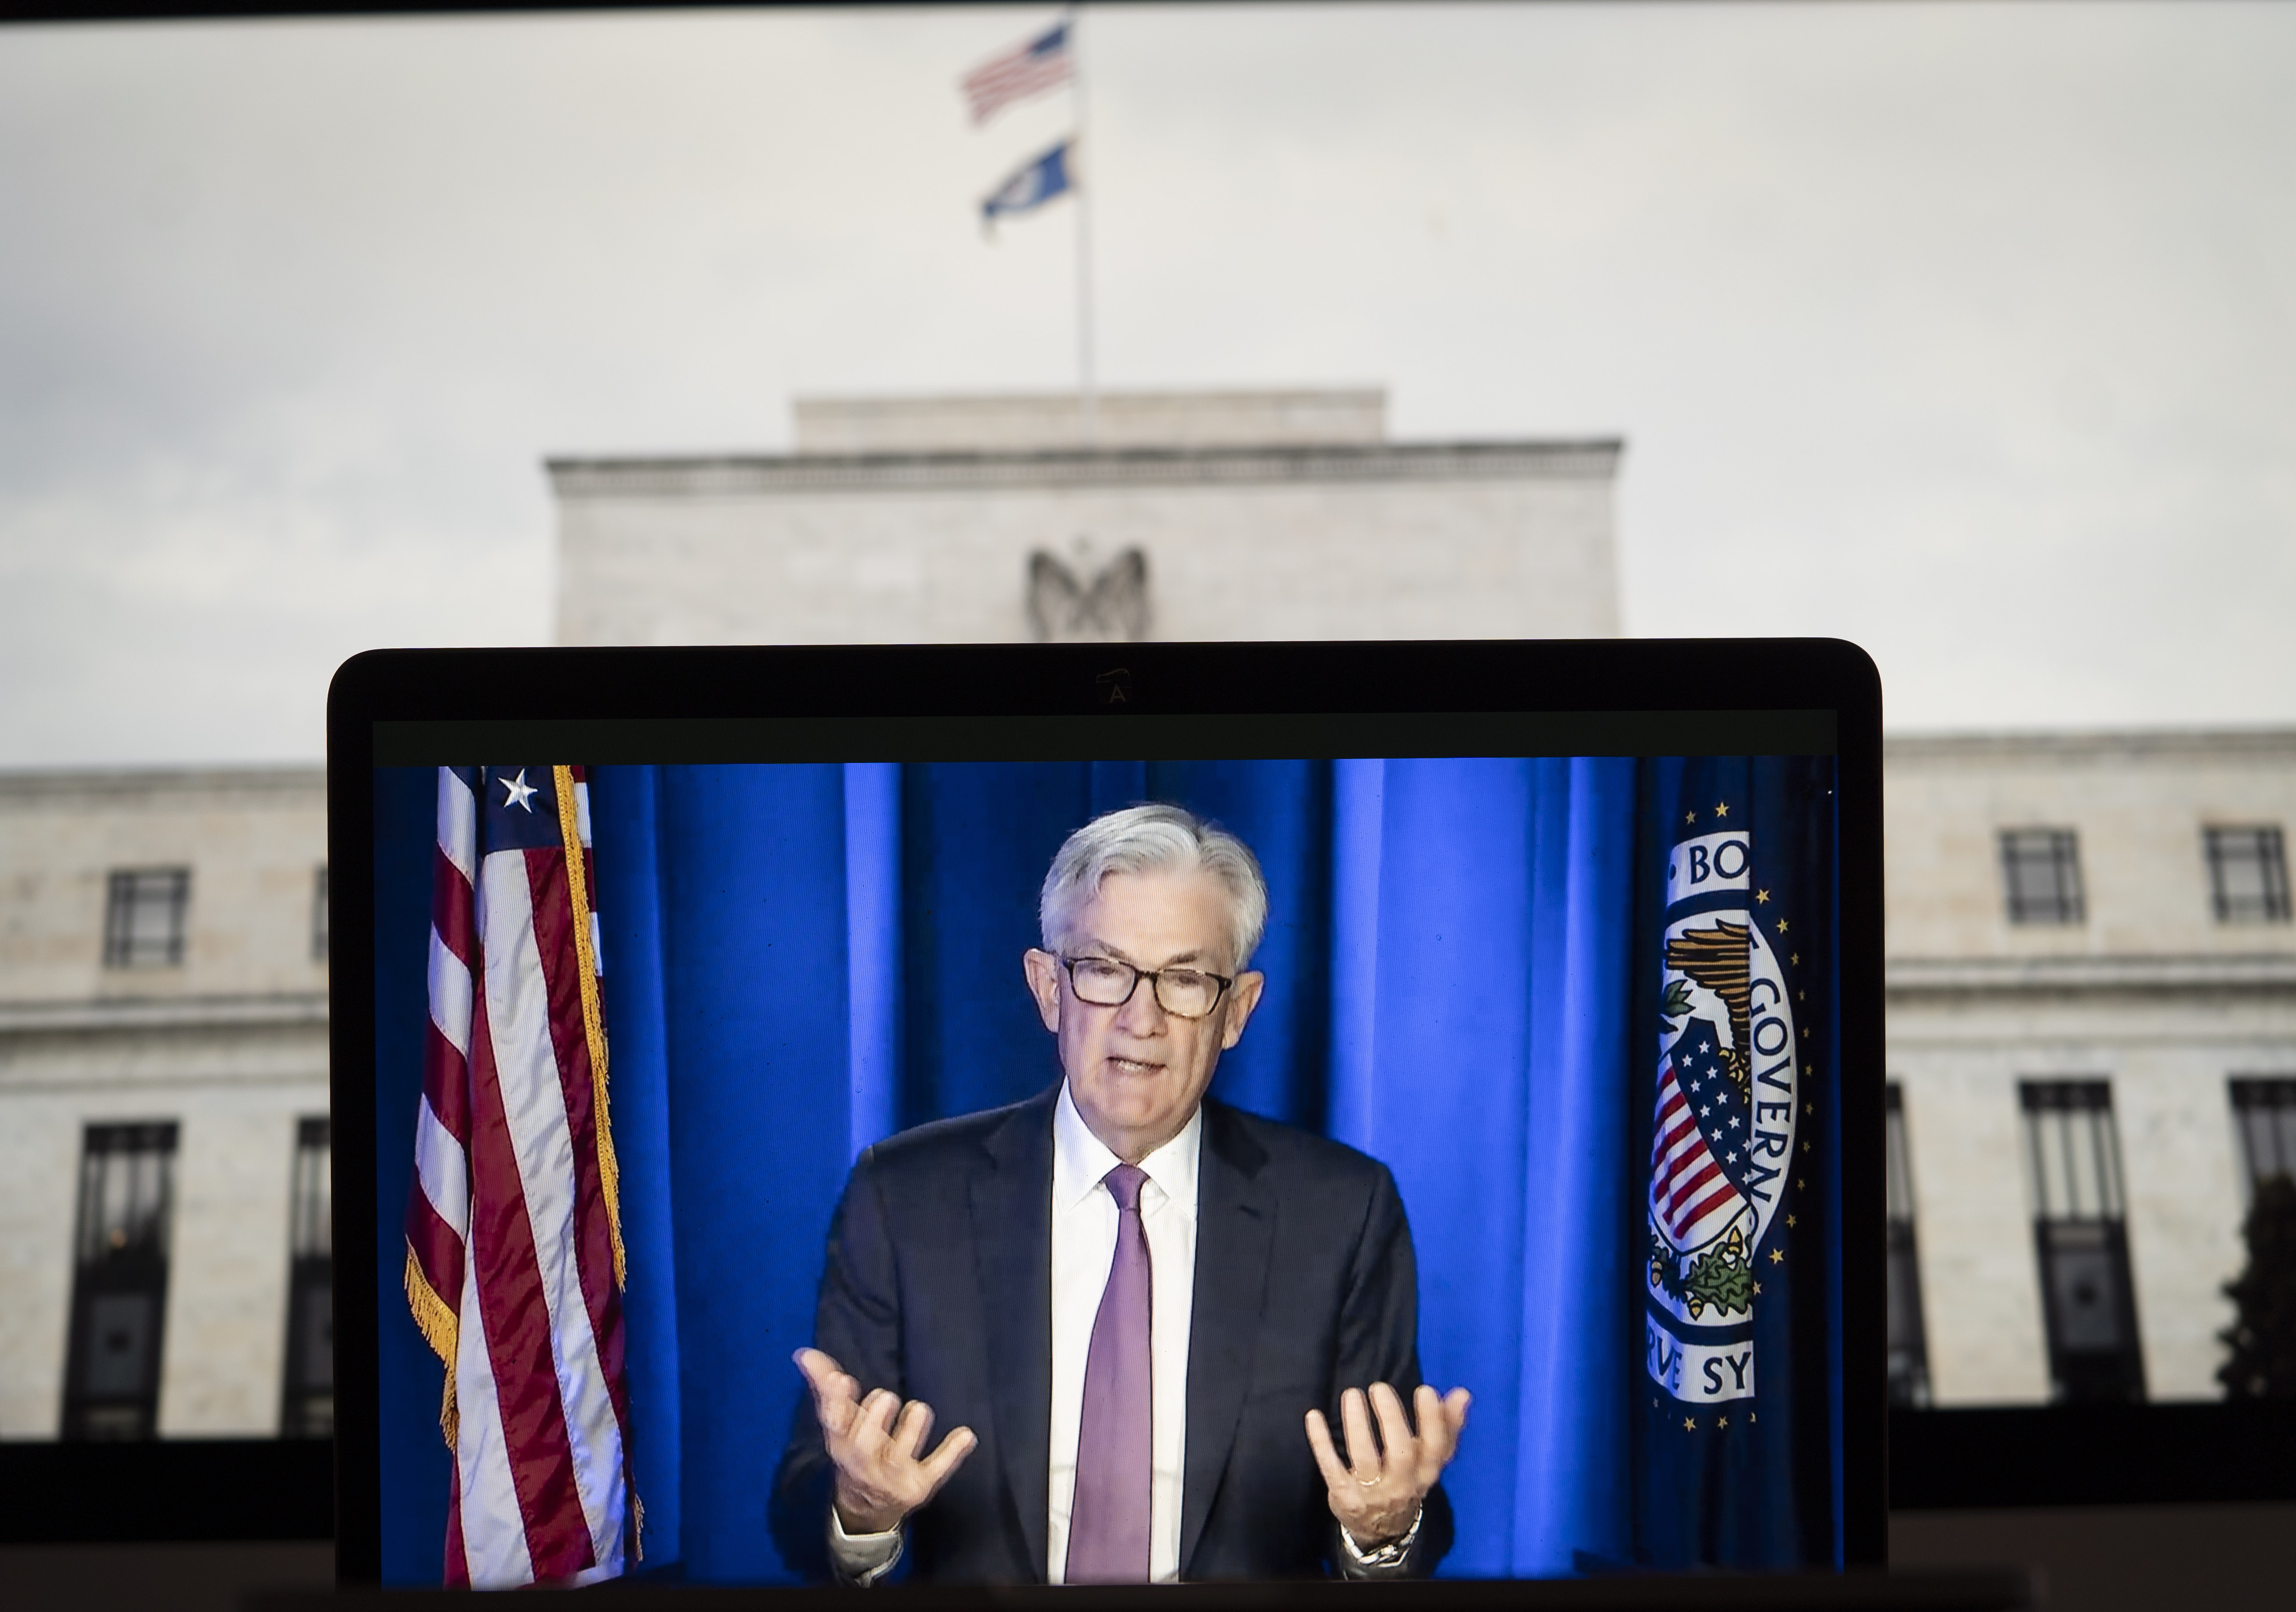 Photo taken in Arlington, the United States, on March 16, 2022 shows a screen displaying U.S. Federal Reserve Chairman Jerome Powell speaking during a virtual press conference.